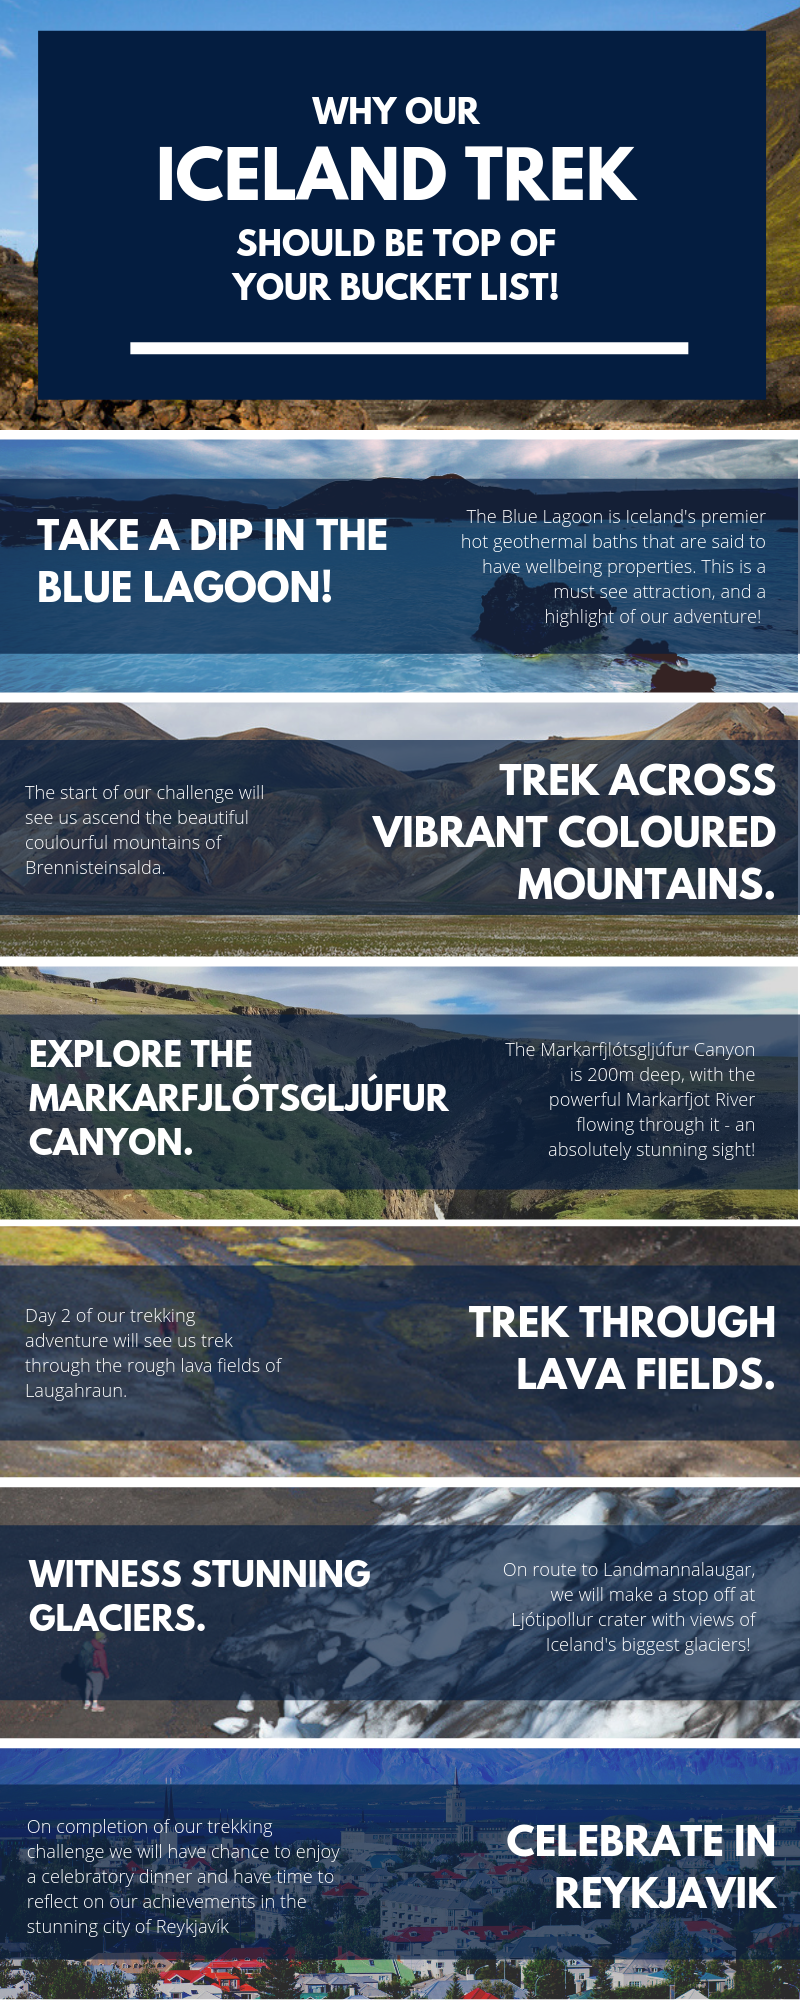 Top reasons why our Iceland Trek should be top of your bucket list.